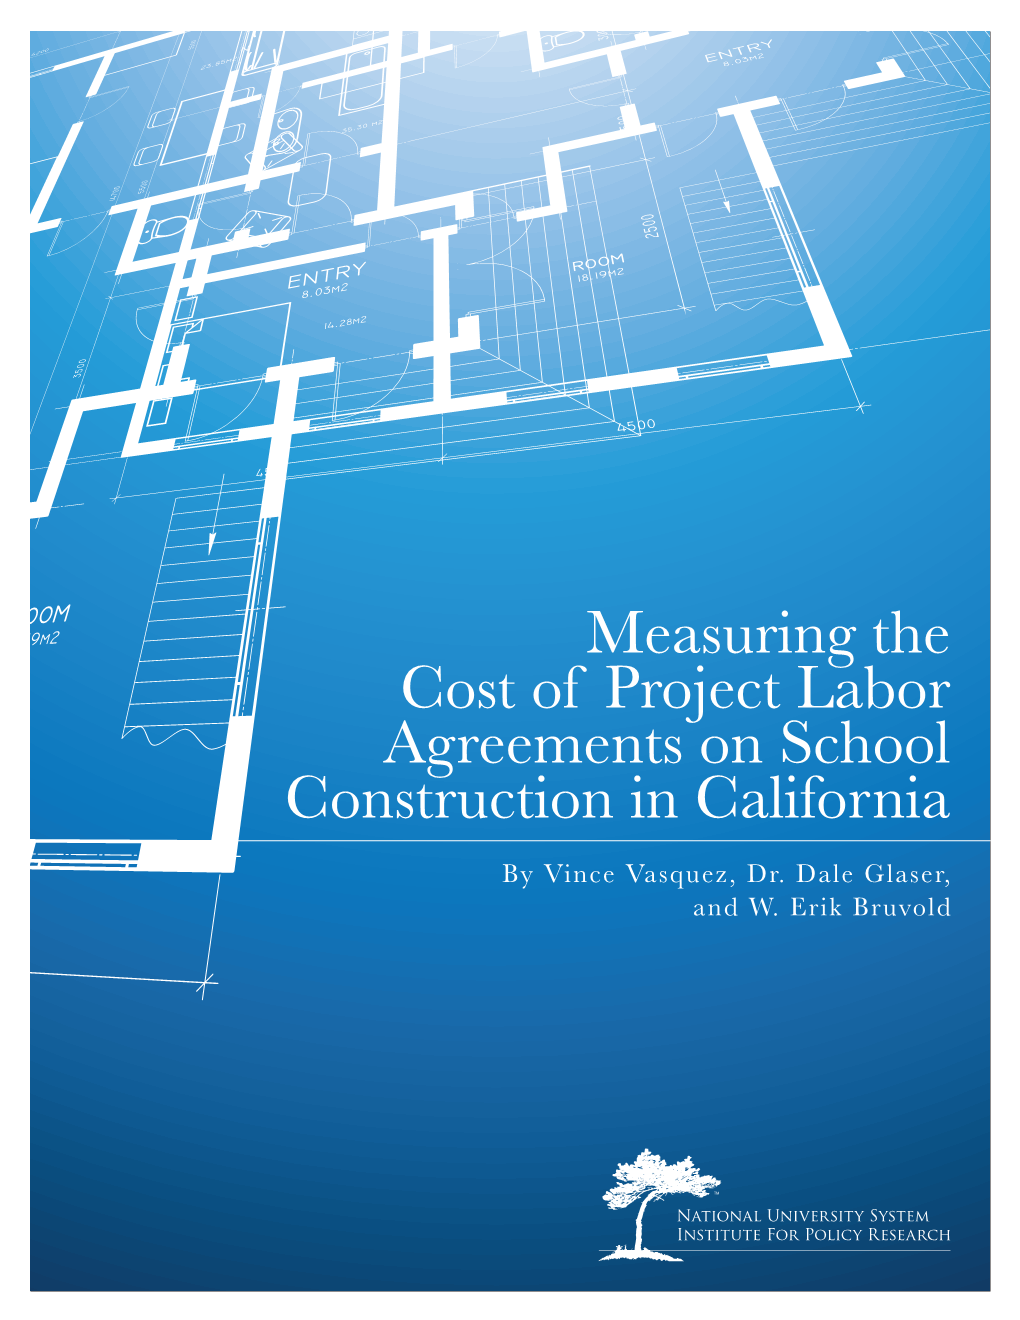 Measuring the Cost of Project Labor Agreements on School Construction in California